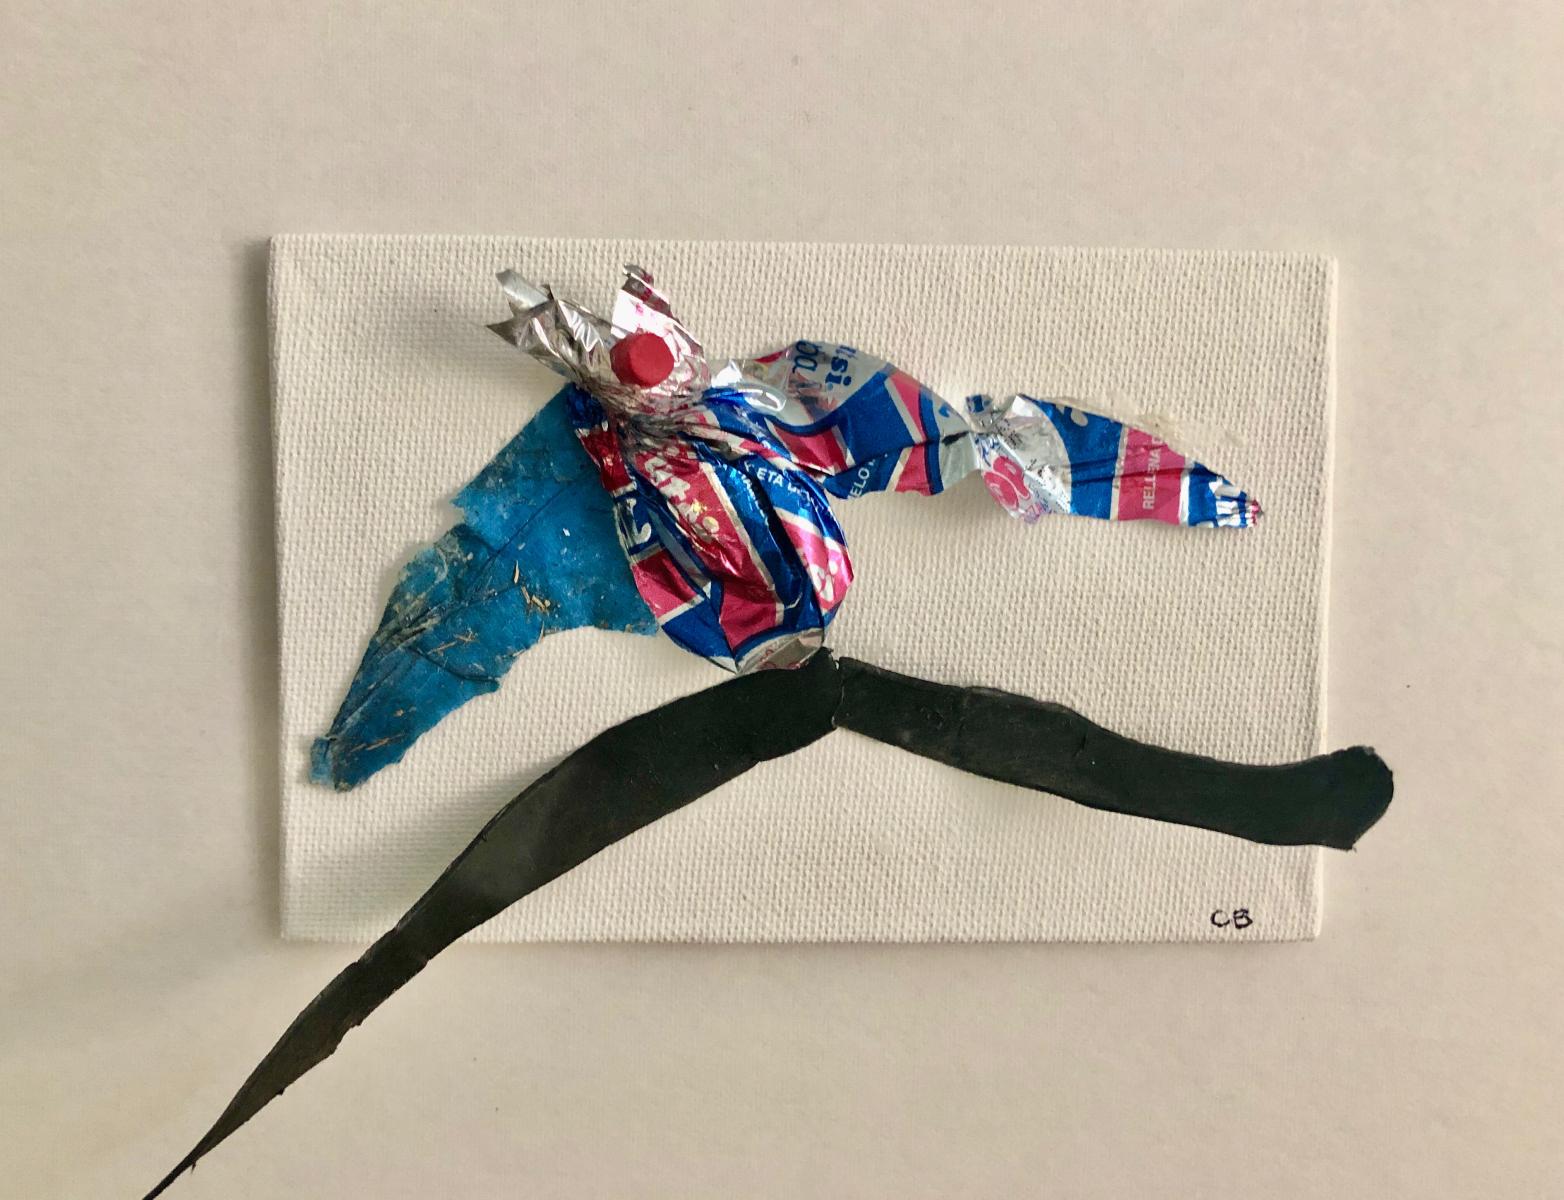 Taking Flight
Collected from The Cabo del Sol Ocean Golf Course
6" x 4"
 : Mexico Collages : ART UNDERFOOT :: CAROL BASTIEN